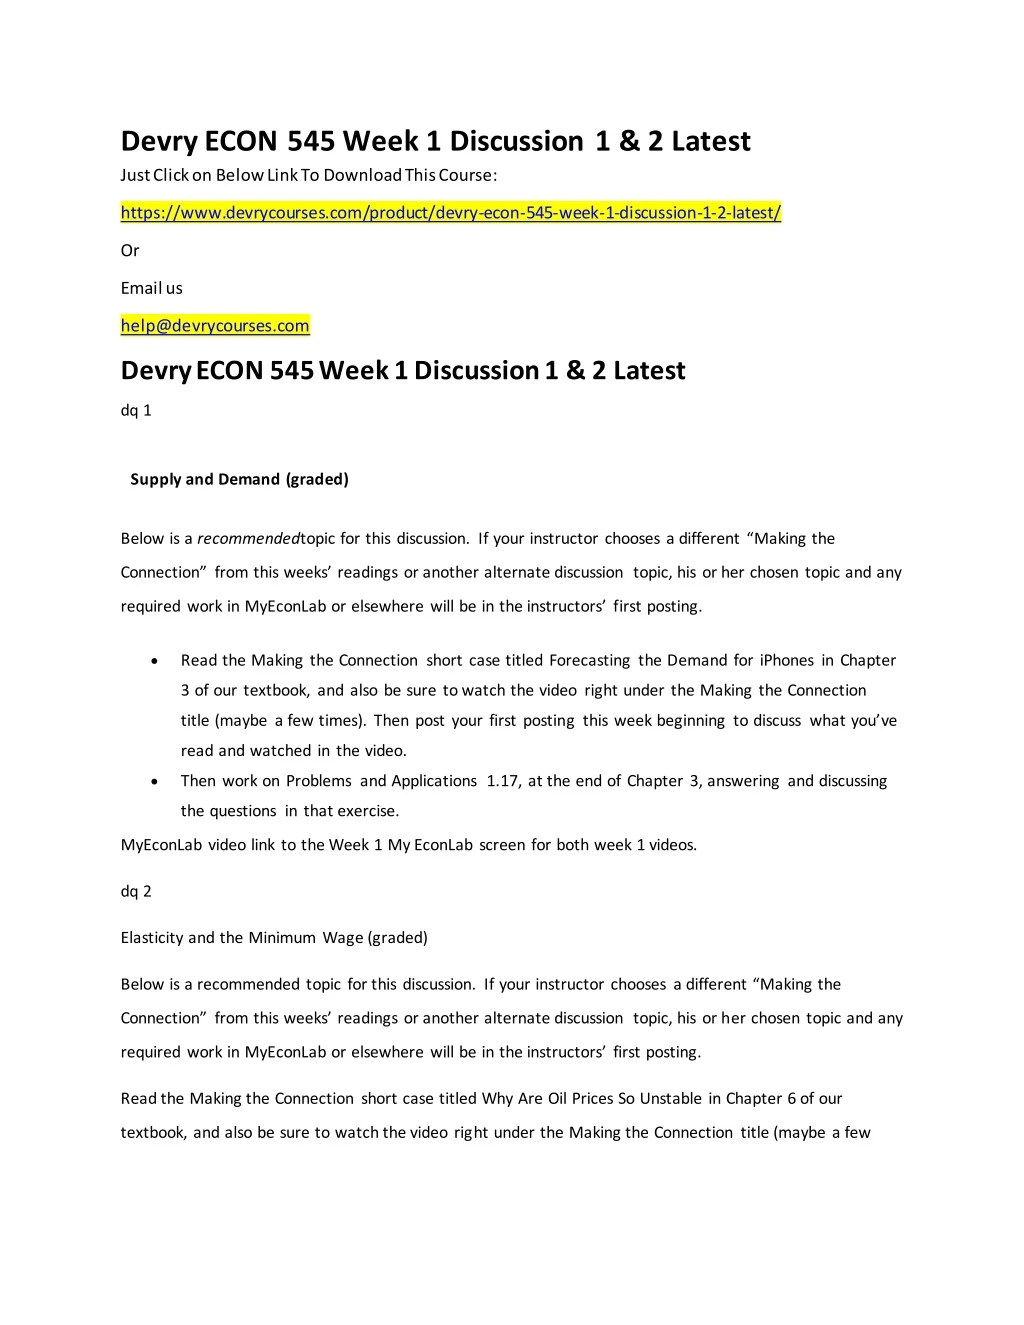 devry econ 545 week 1 discussion 1 2 latest just